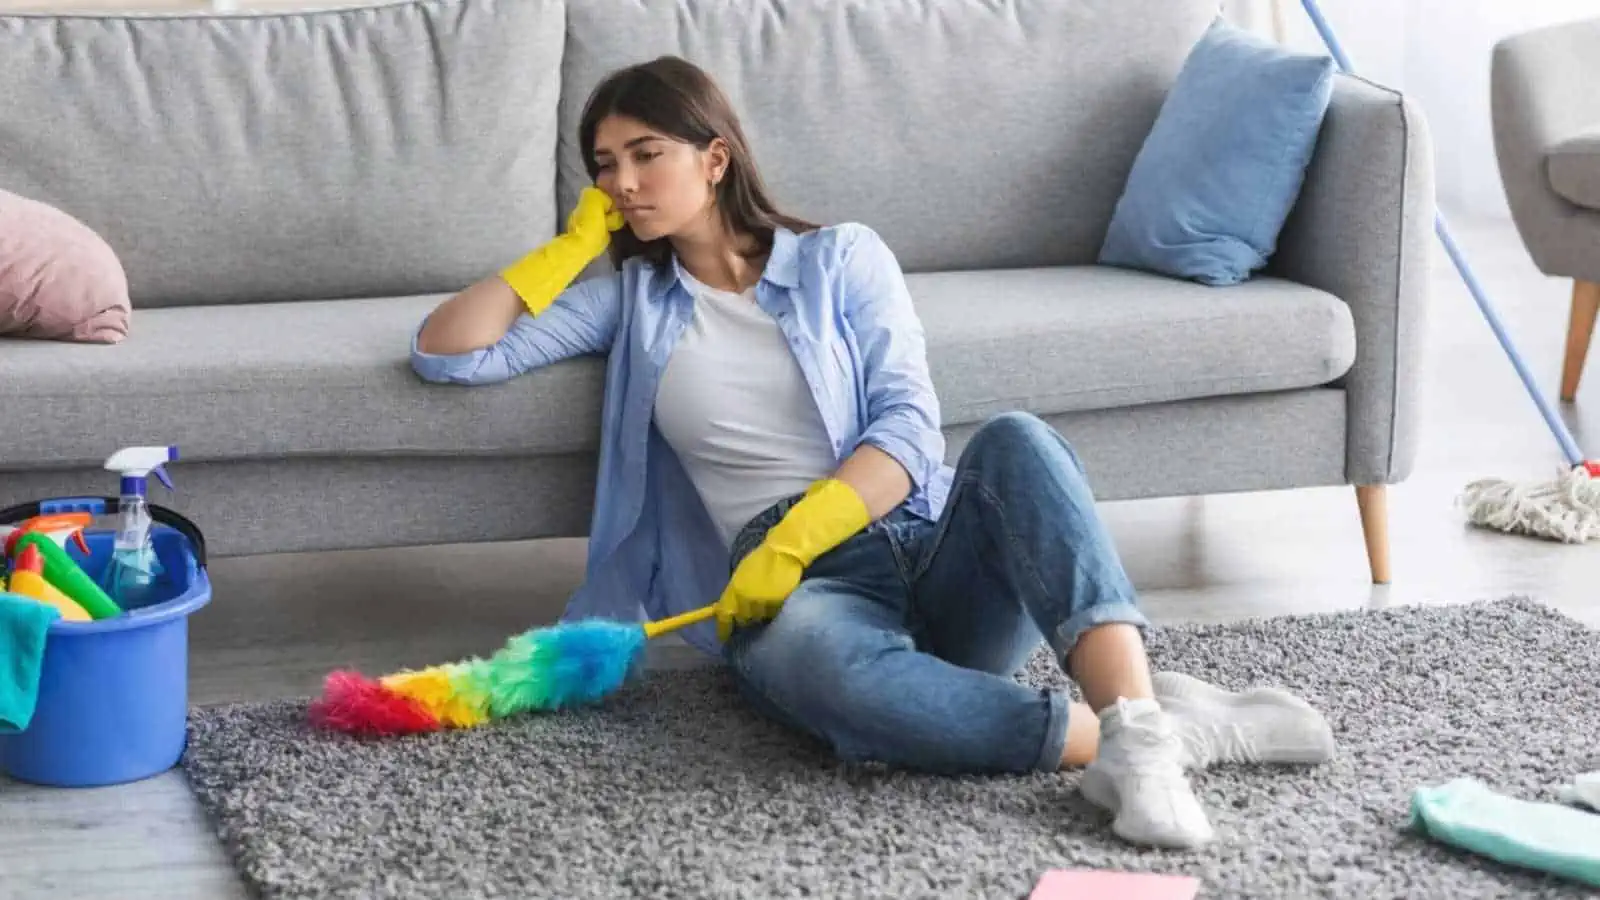 Tired woman leaning on couch, wearing protective gloves, sitting on rug floor carpet surrounded by dust cloth and detergents, taking break while cleaning apartment. Exhausted female looking at mess